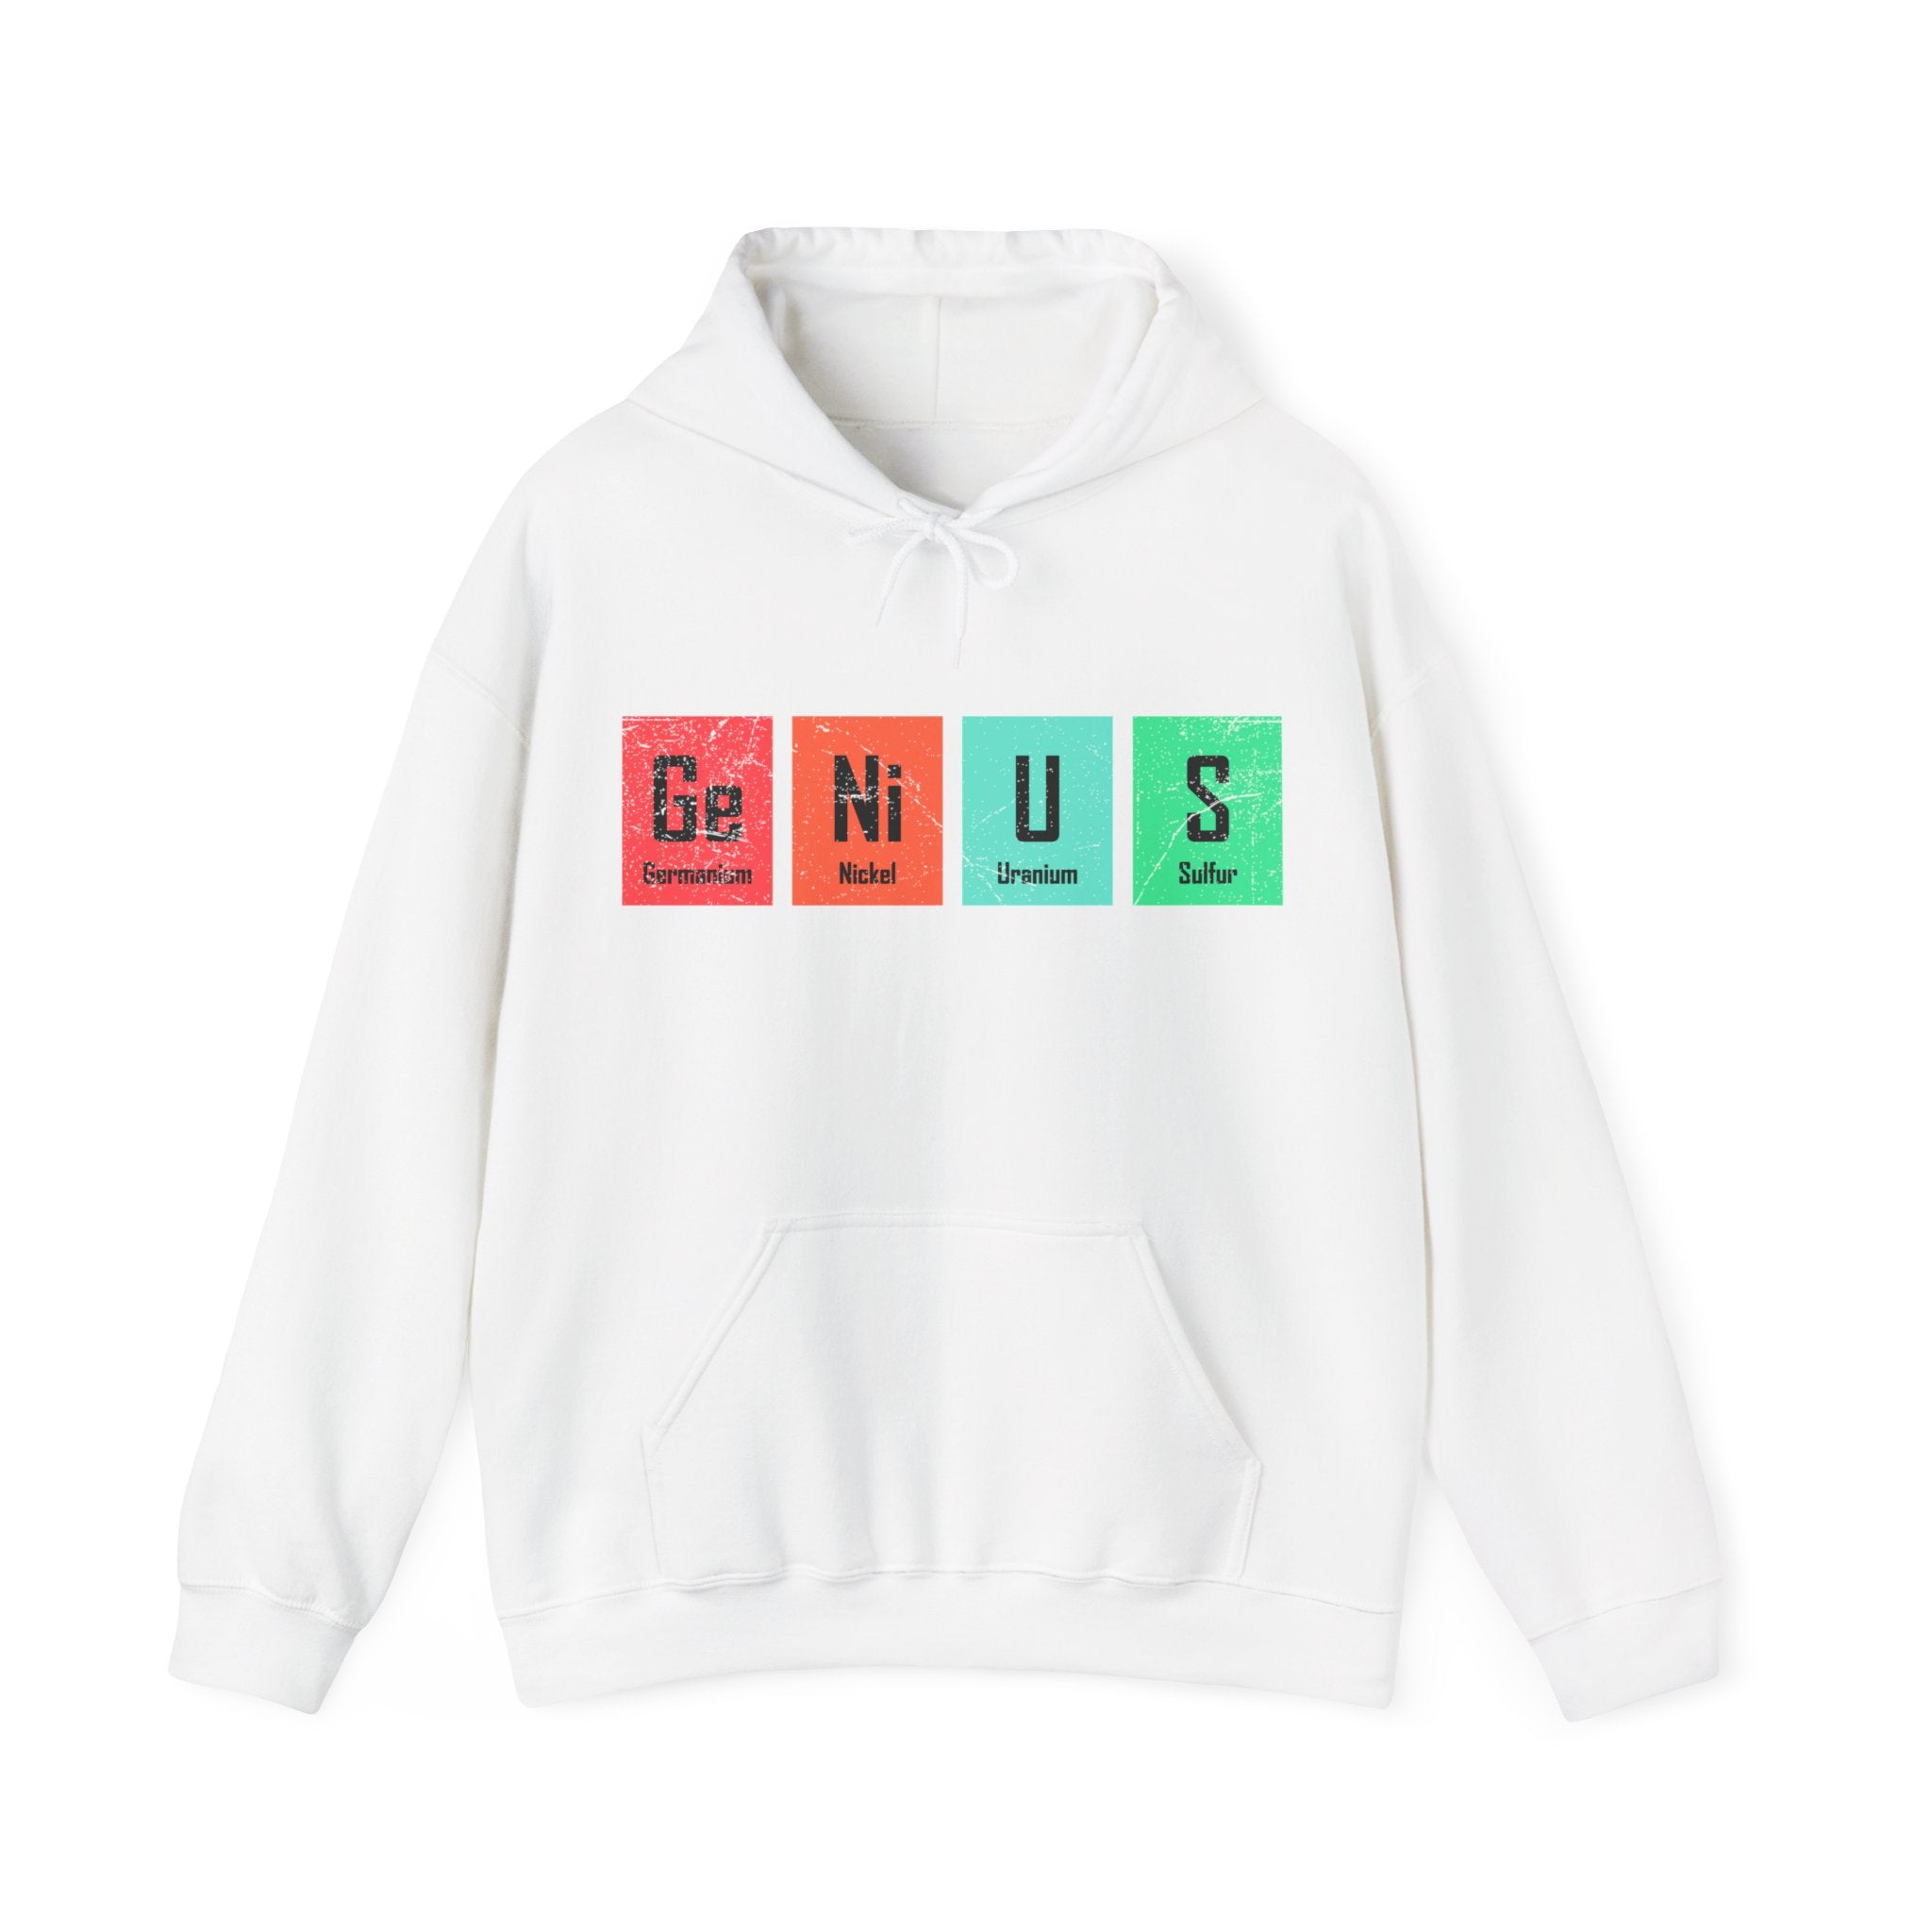 Ge-Ni-U-S - Hooded Sweatshirt with a periodic table-inspired design spelling "Genius" using the elements Germanium, Nickel, Uranium, and Sulfur. This cozy garment combines comfy feel and unique designs for a look that's both clever and comfortable.